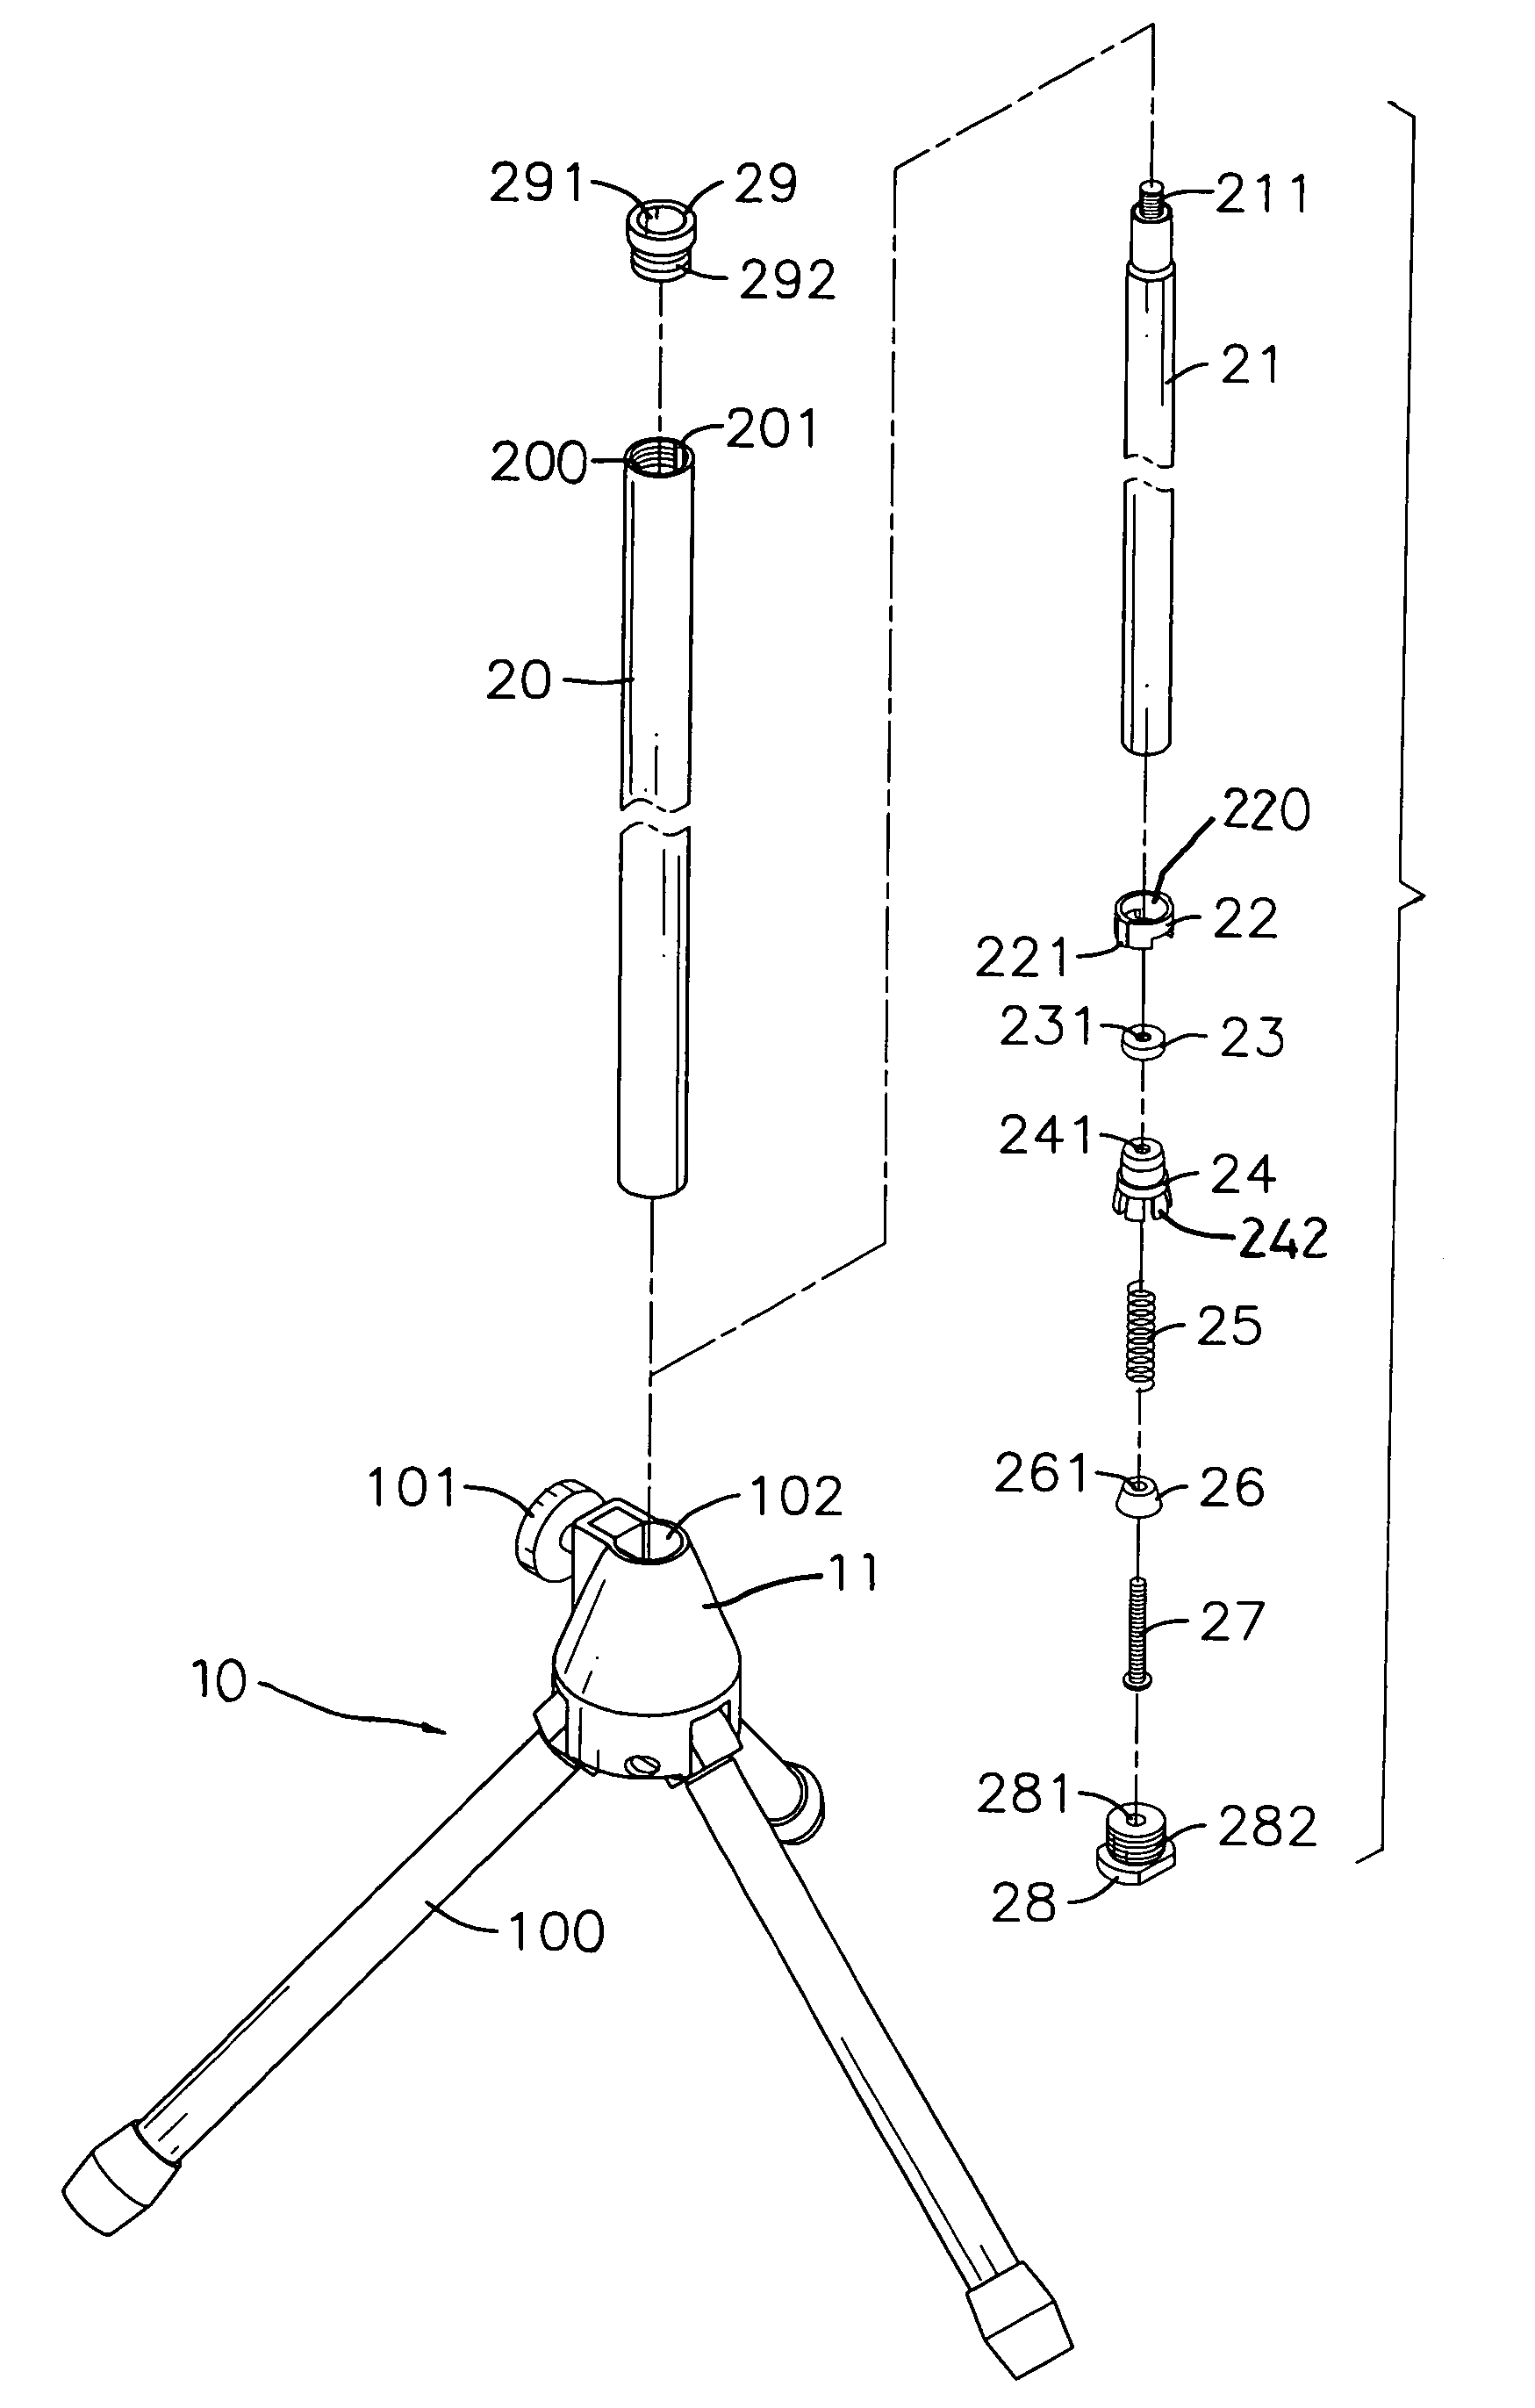 Locking device for a telescopic tube assembly